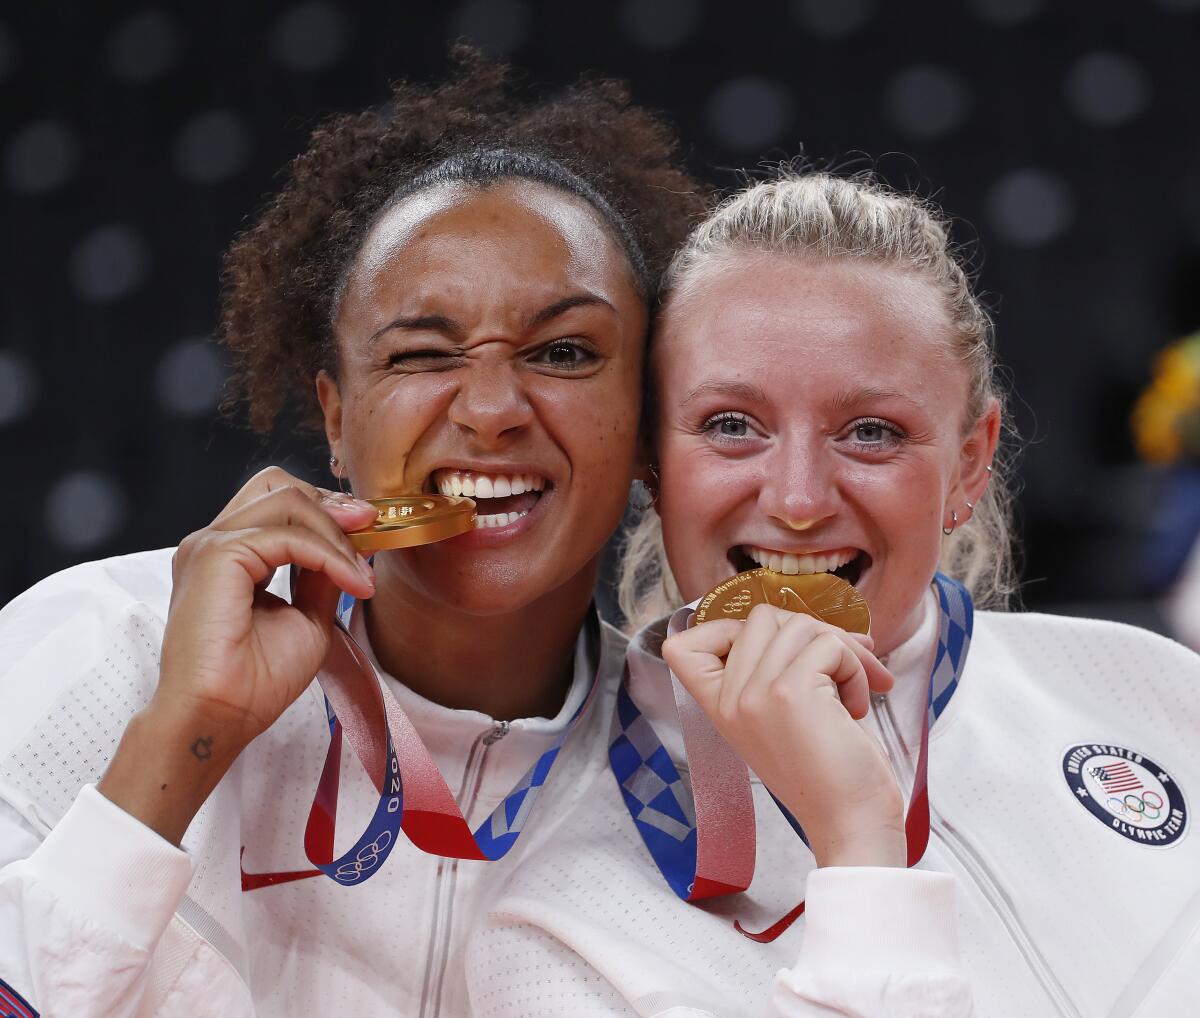 Haleigh Washington and Jordyn Poulter jokingly bite their gold medals